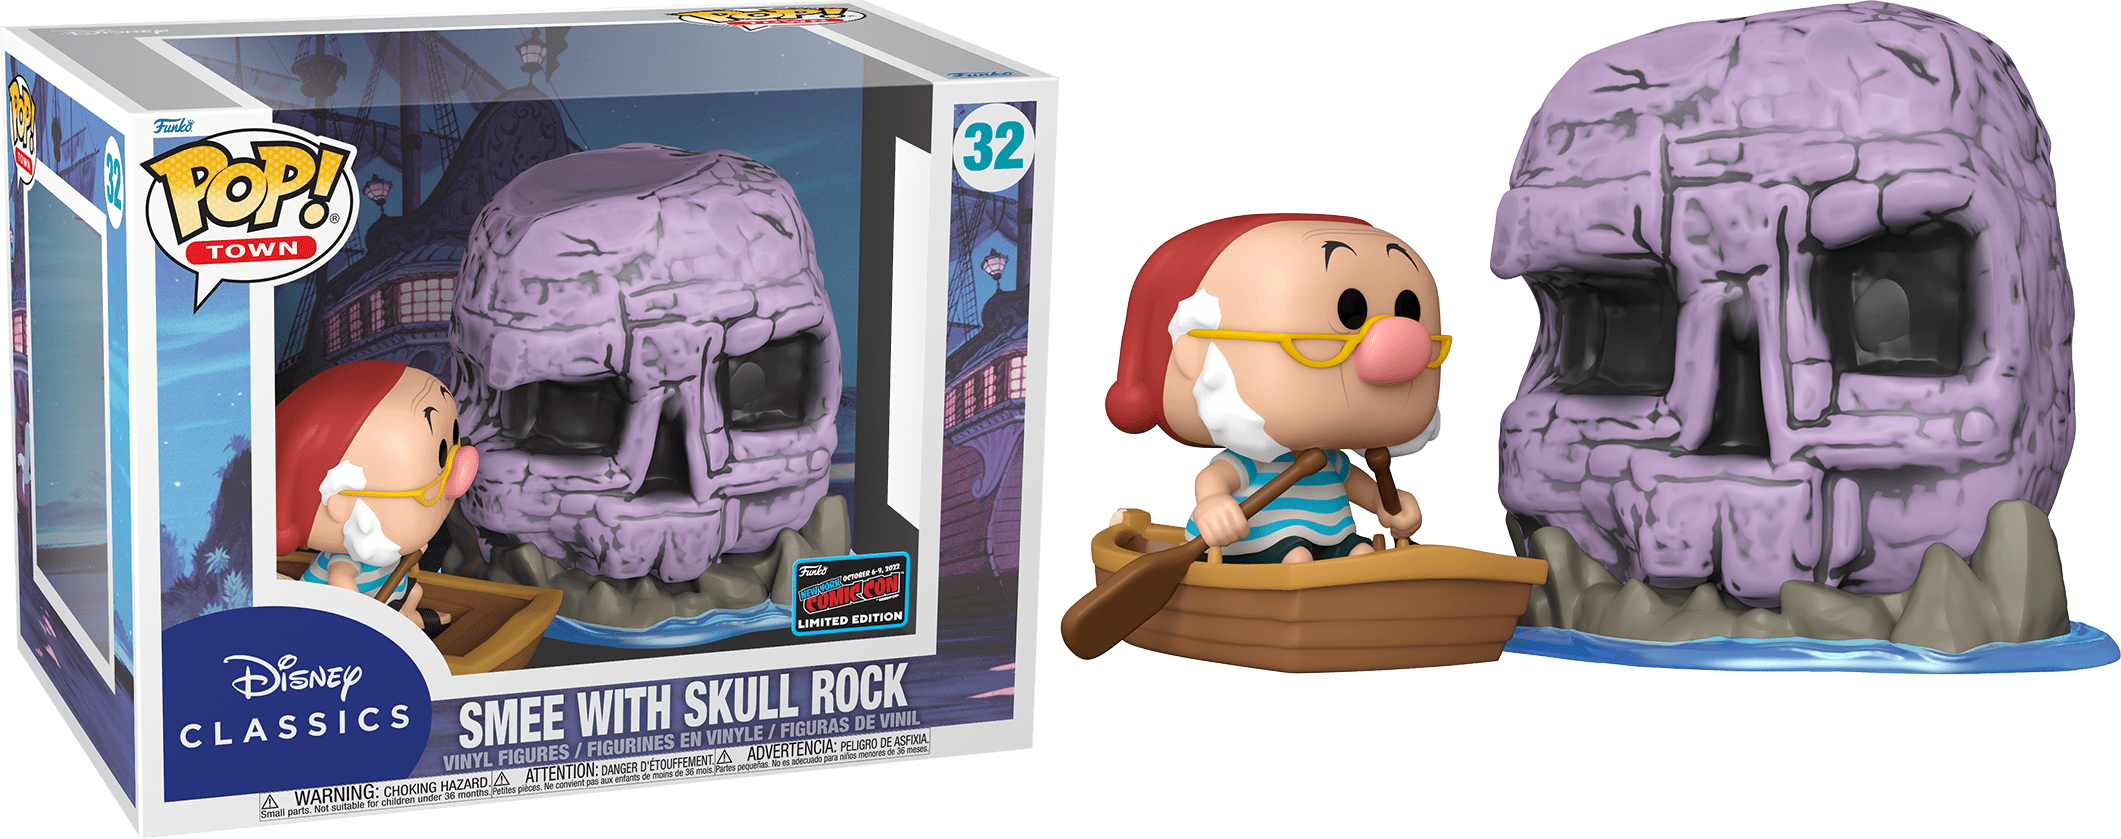 Funko POP! Town Disney Classics Peter Pan Smee with Skull Rock #32 Limited Edition 2022 NYCC Exclusive Sticker